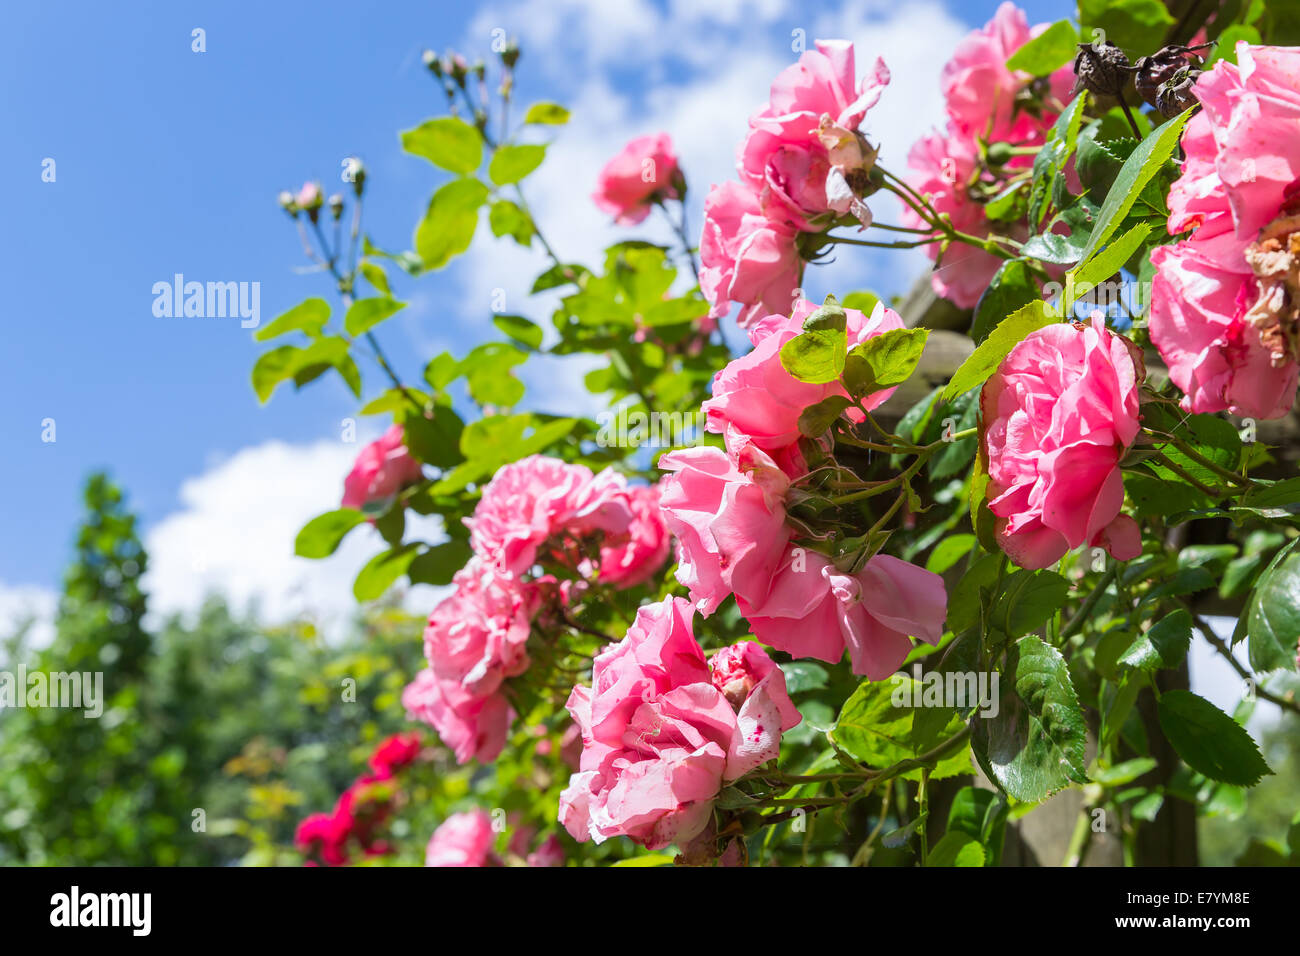 Pink rosa in an ornamental garden with selective focus against a blue sky Stock Photo